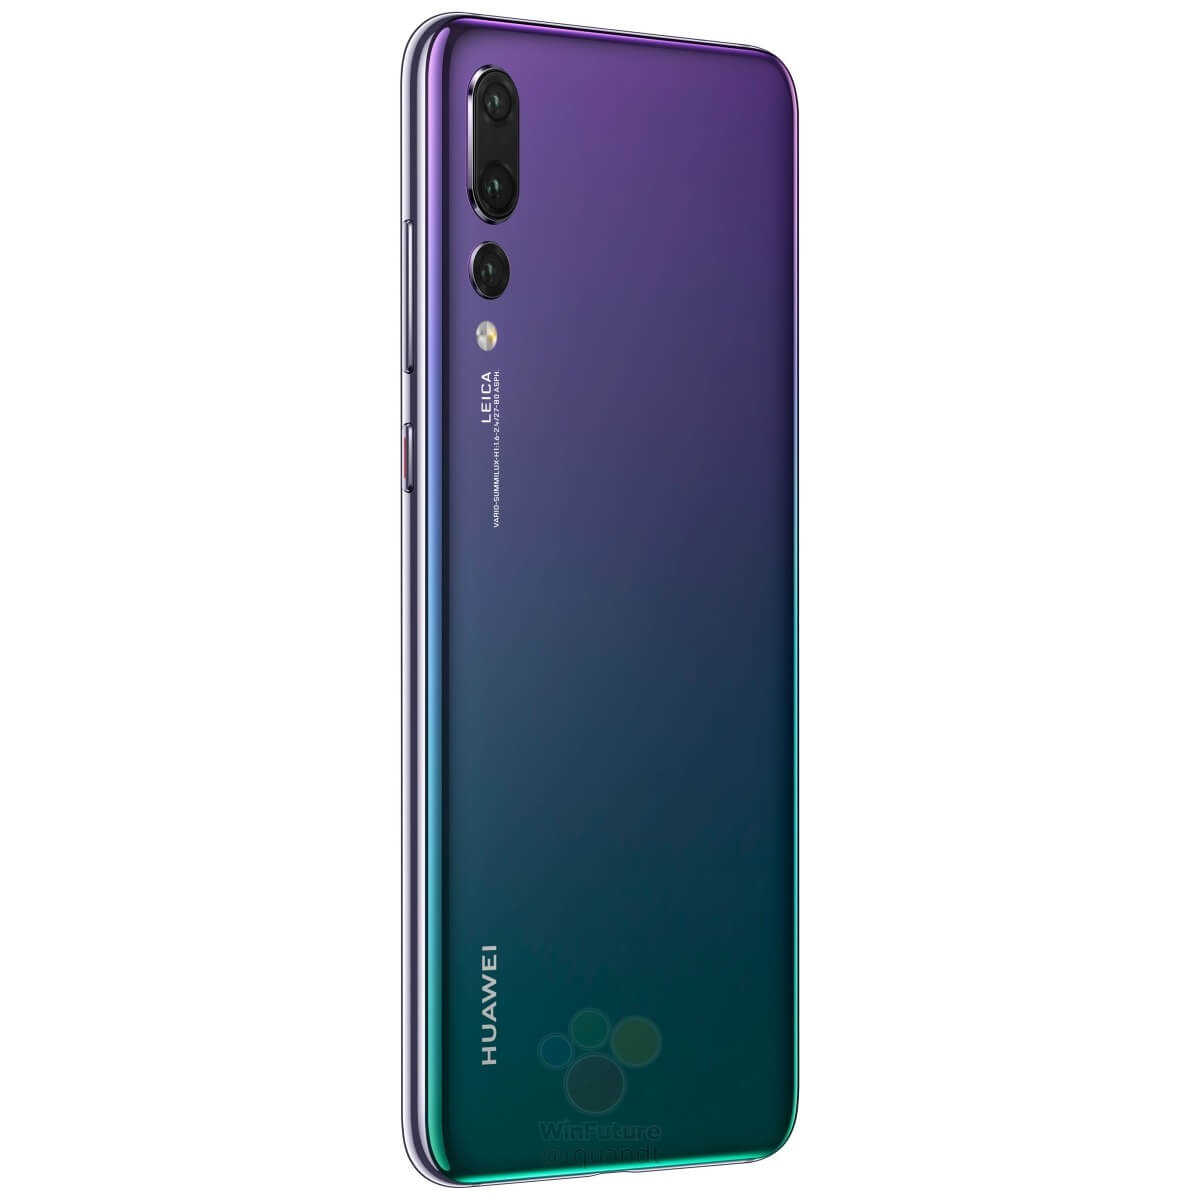 Smartphones With Dual Sim Cards And Cameras Huawei Mate P20 Lite